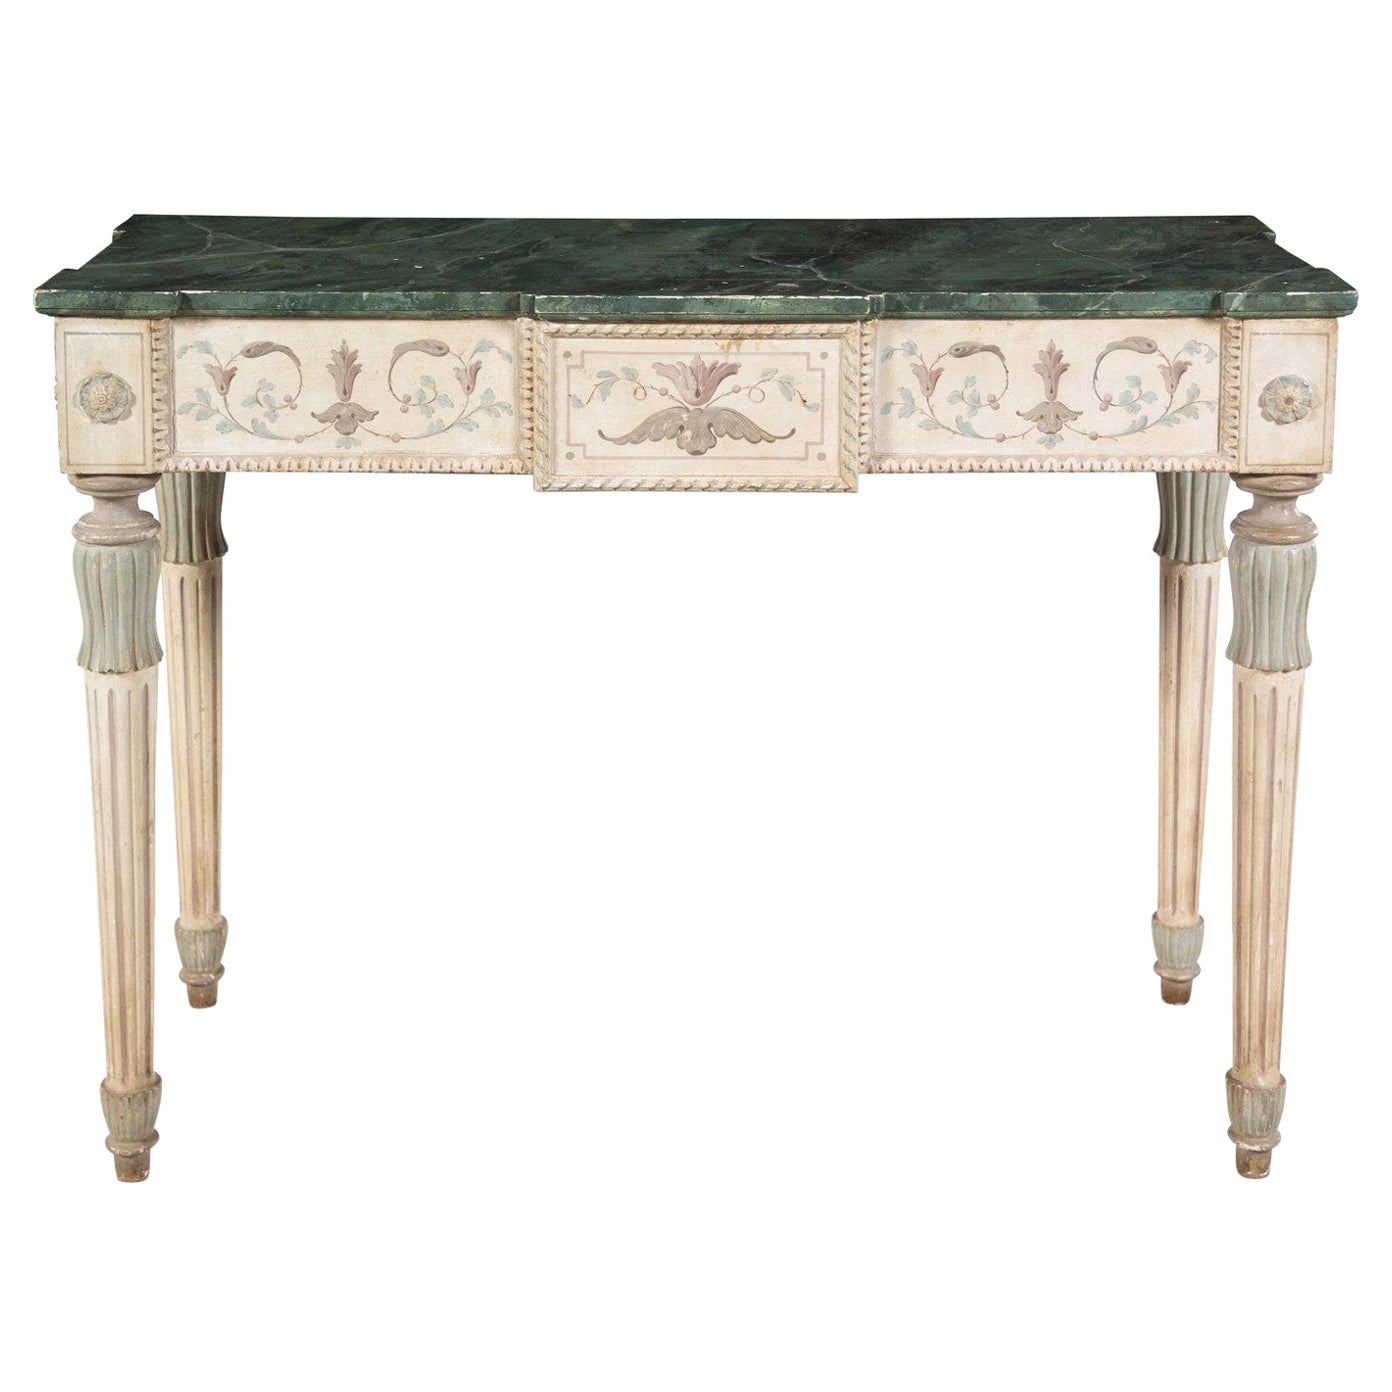 Italian Painted Console Table with a Wood Faux Marbleize Top, Late 19th Century For Sale